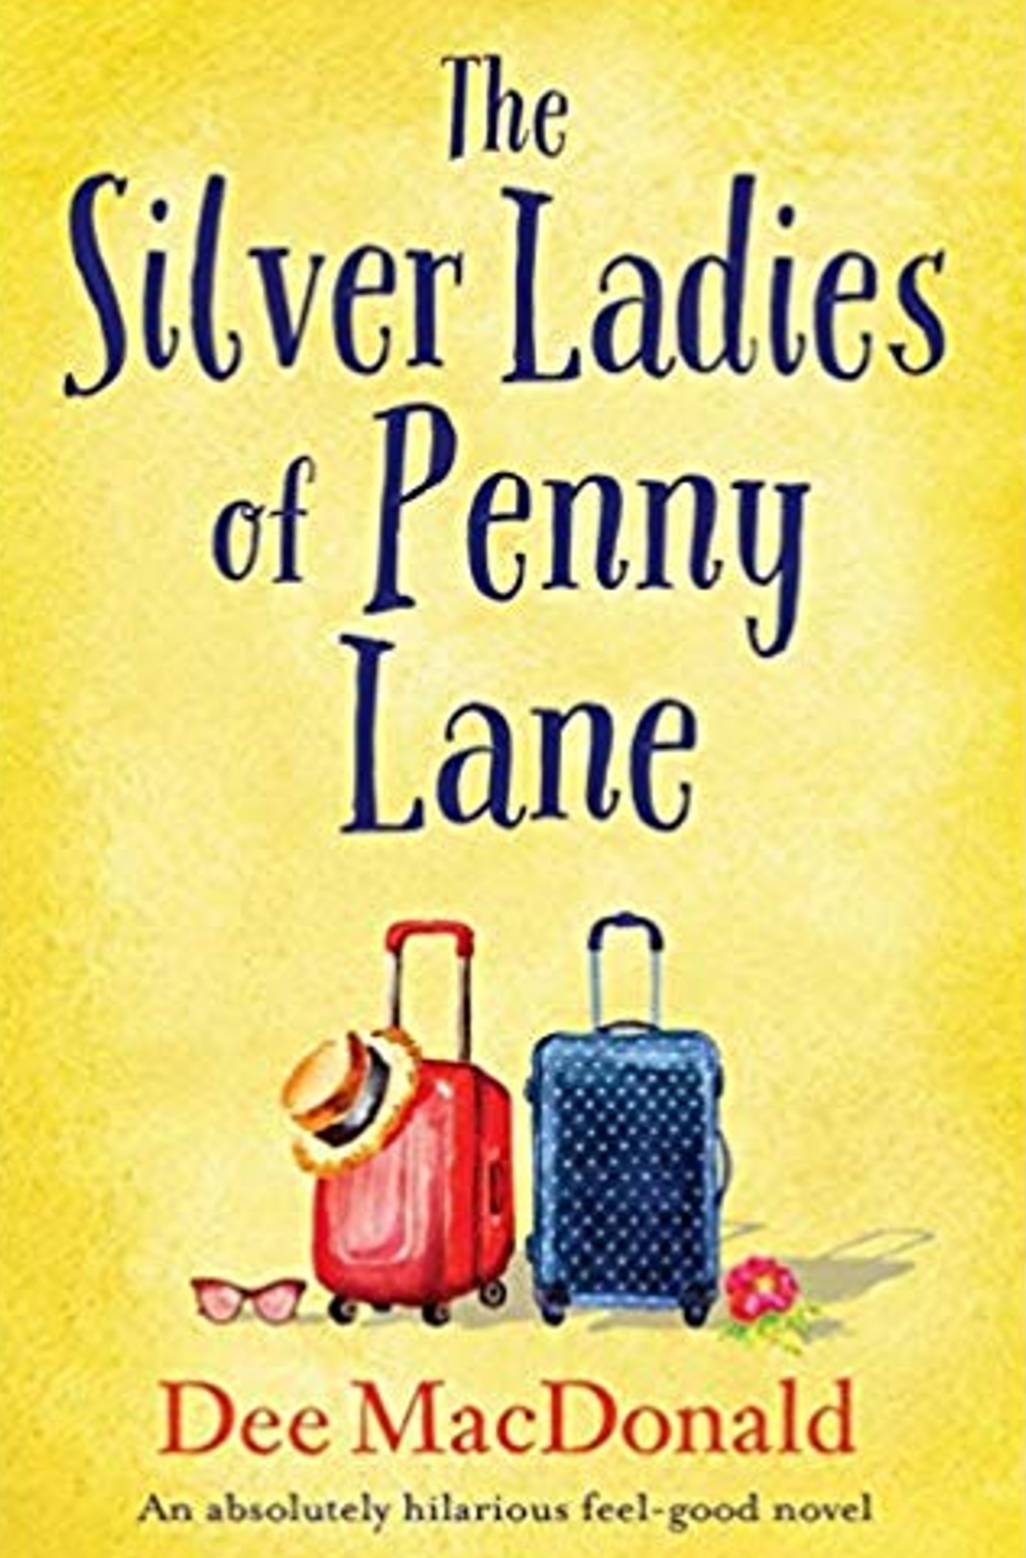 The Silver Ladies of Penny Lane by Dee MacDonald